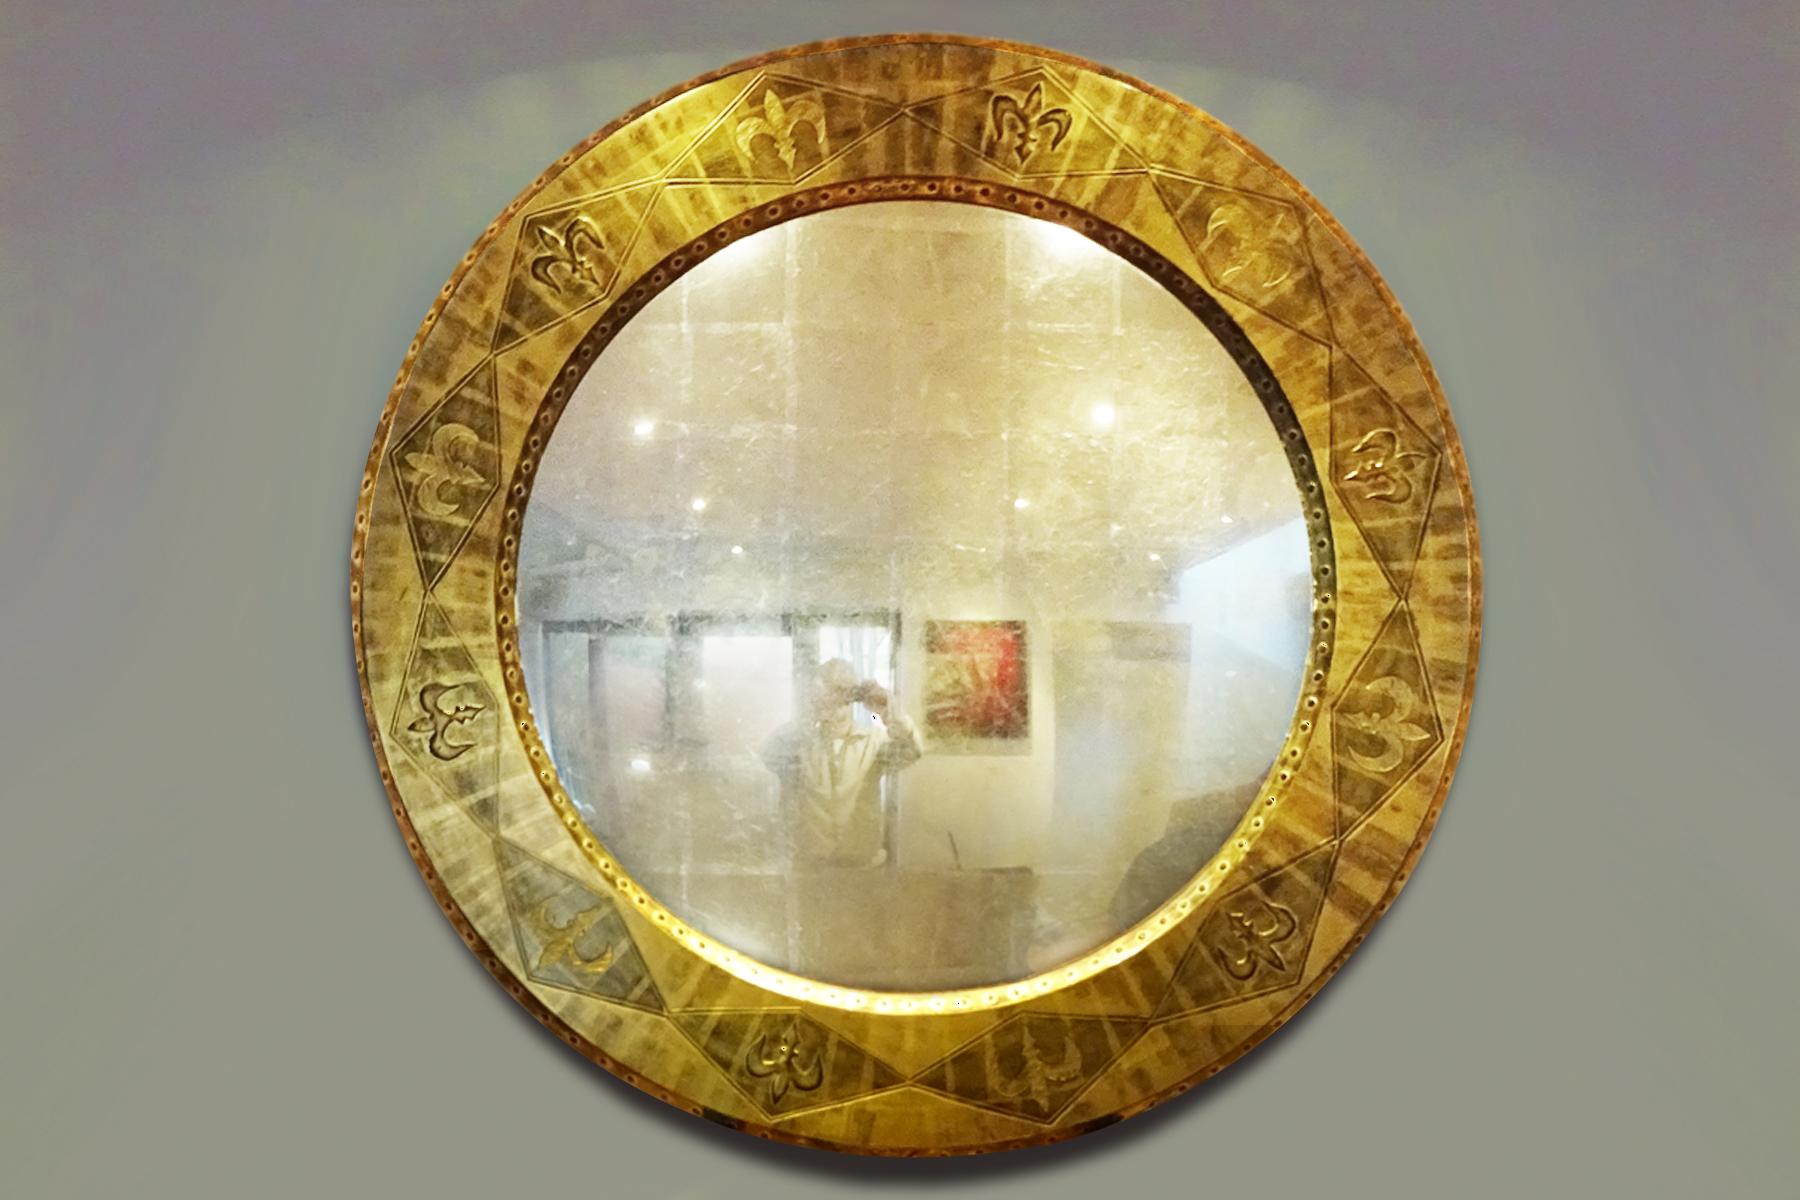 Large, rare and unique early Isabel Tennant 23-carat gold leaf circular mirror dating from 1996

This is a beautiful crafted hand carved circular mirror by the professional gilder and designer Issy Tennant. It dates from the early part of her